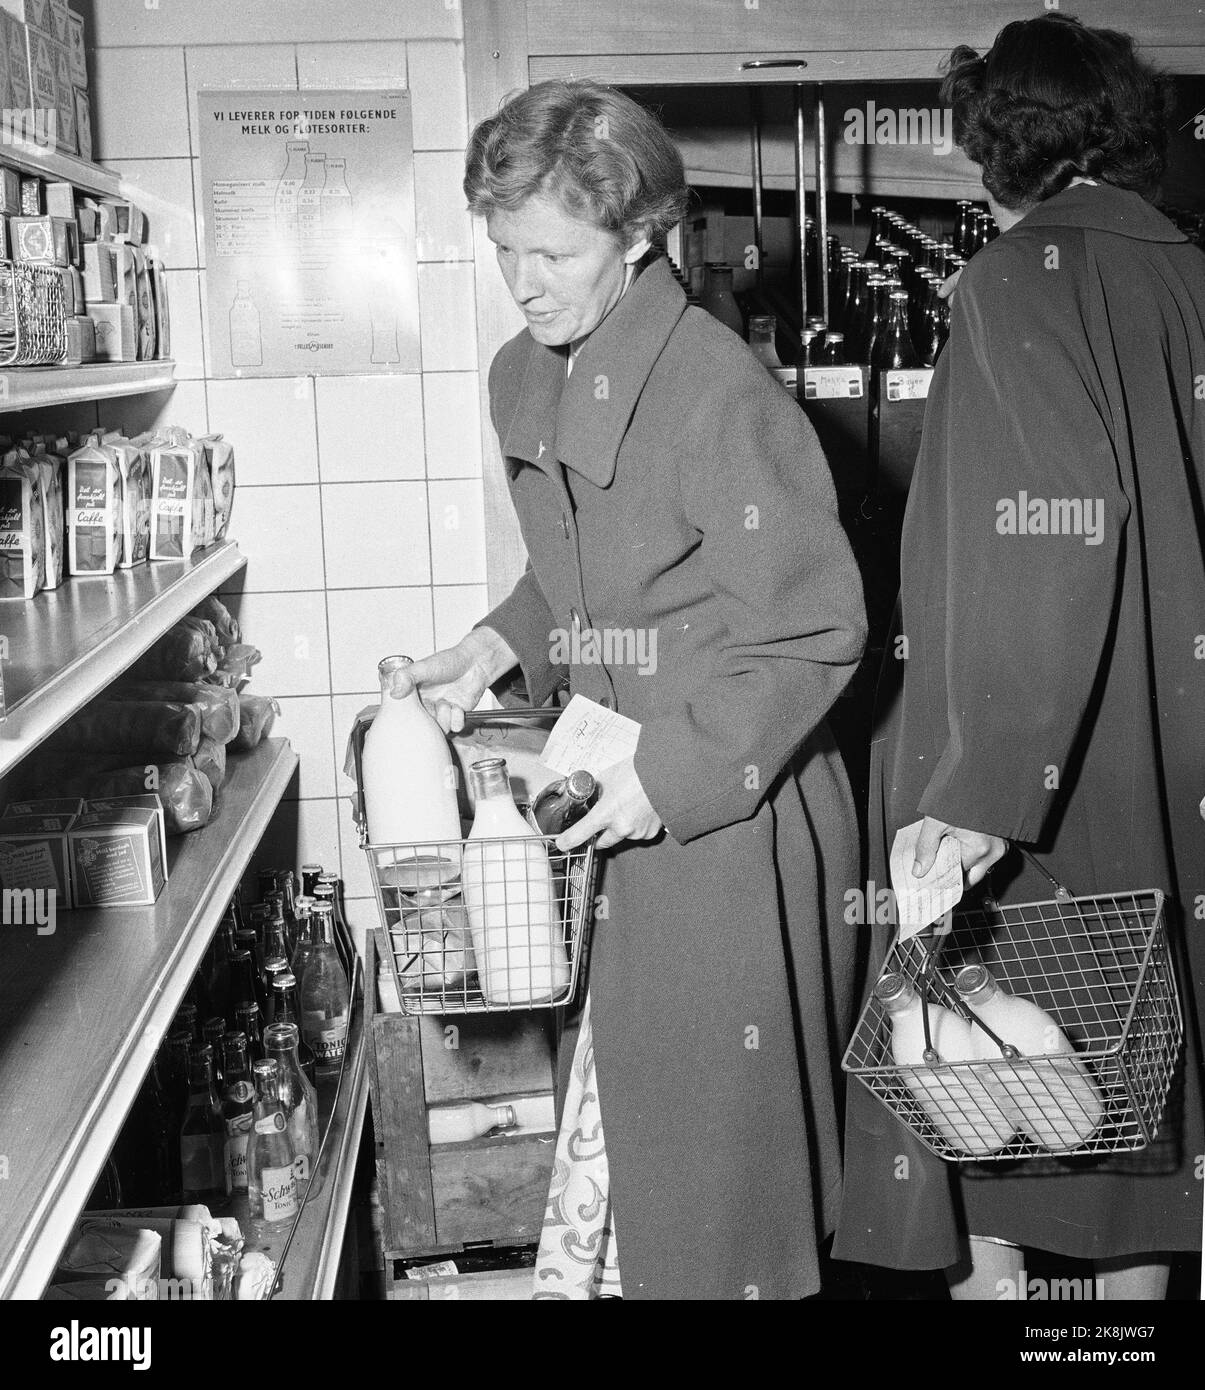 19550917 The milk our problem child Milk shortage in Oslo. People are in line to grab milk. Volunteering has been introduced. Women at the store to buy milk and other foods. Photo; Sverre A. Børretzen / Current / NTB NB! Photo not dust treated! Stock Photo